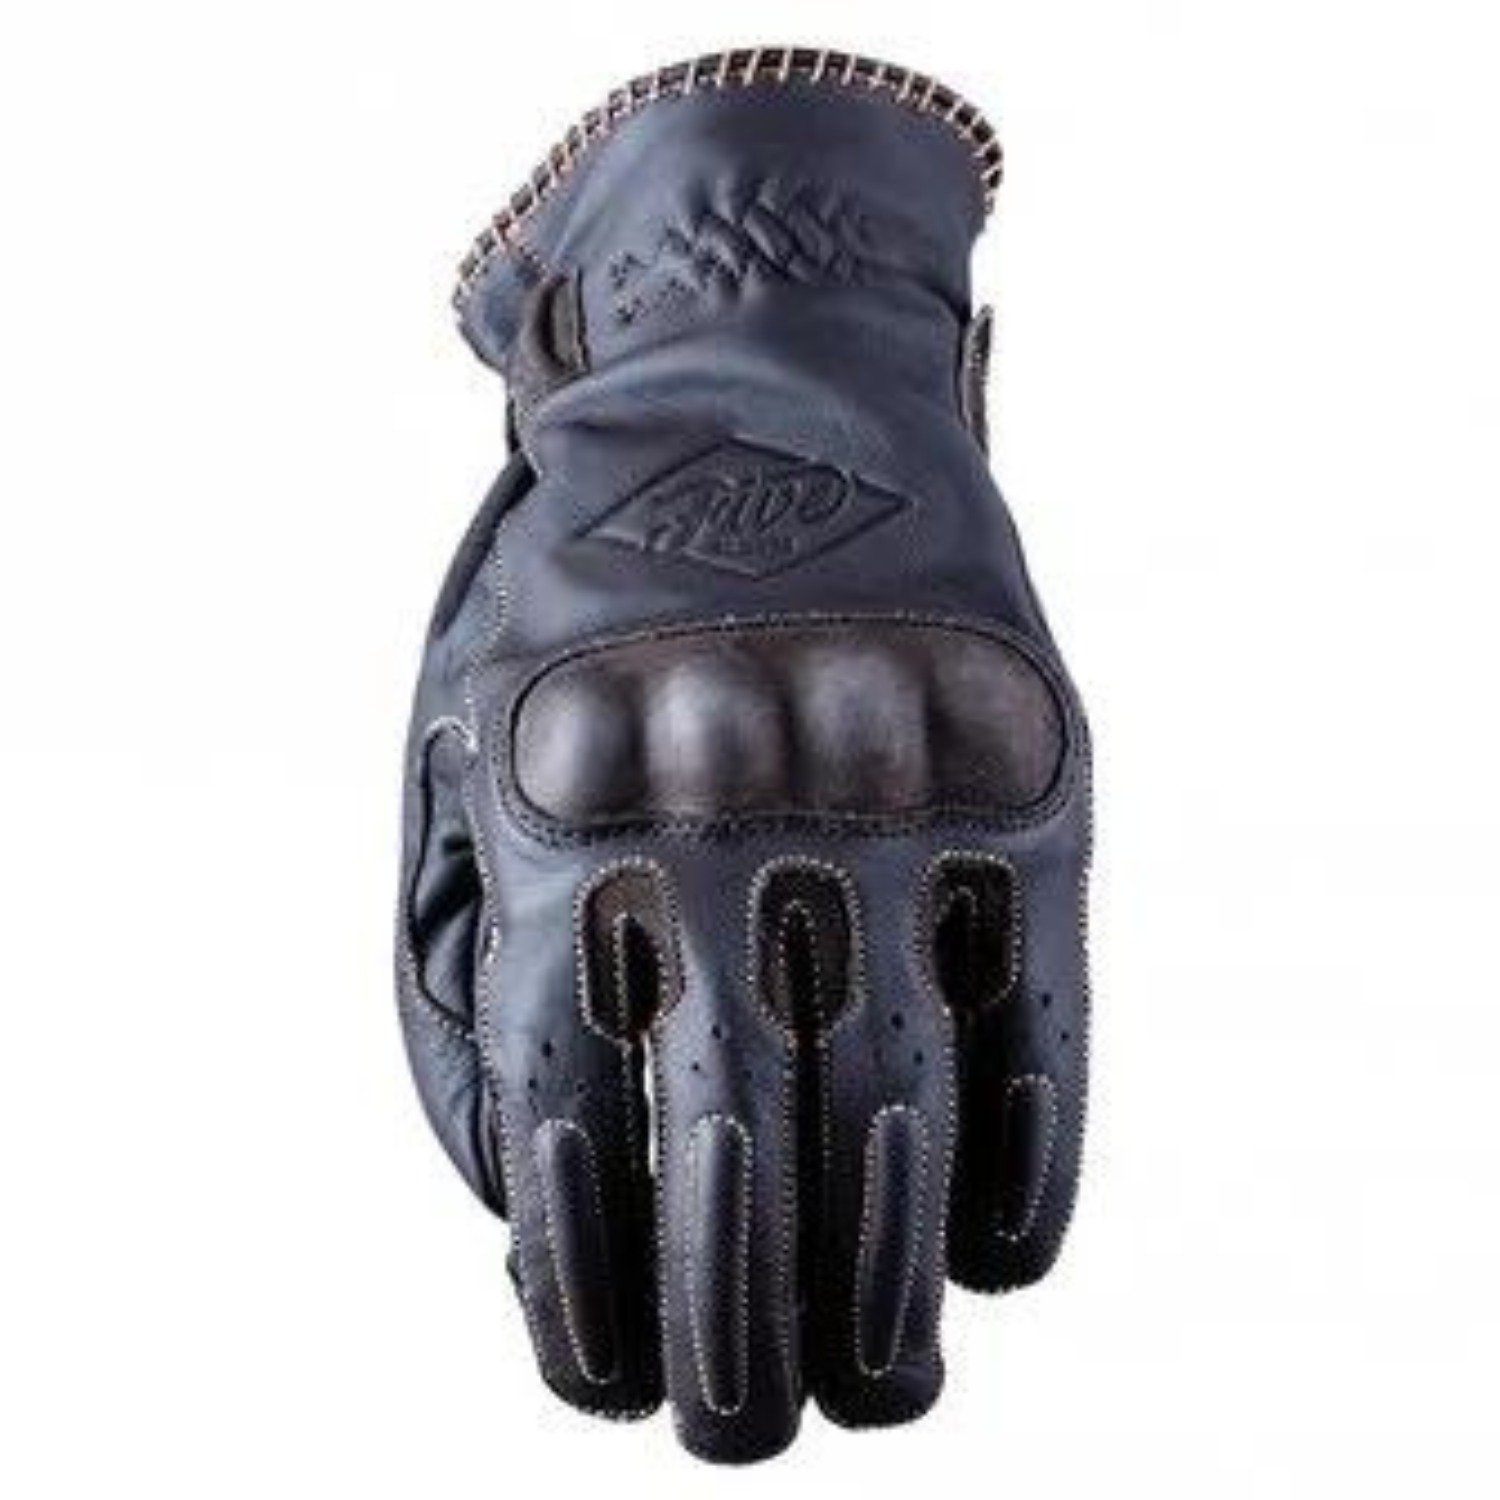 Image of Five Oklahoma Gloves Dark Brown Size 2XL ID 4770916487696